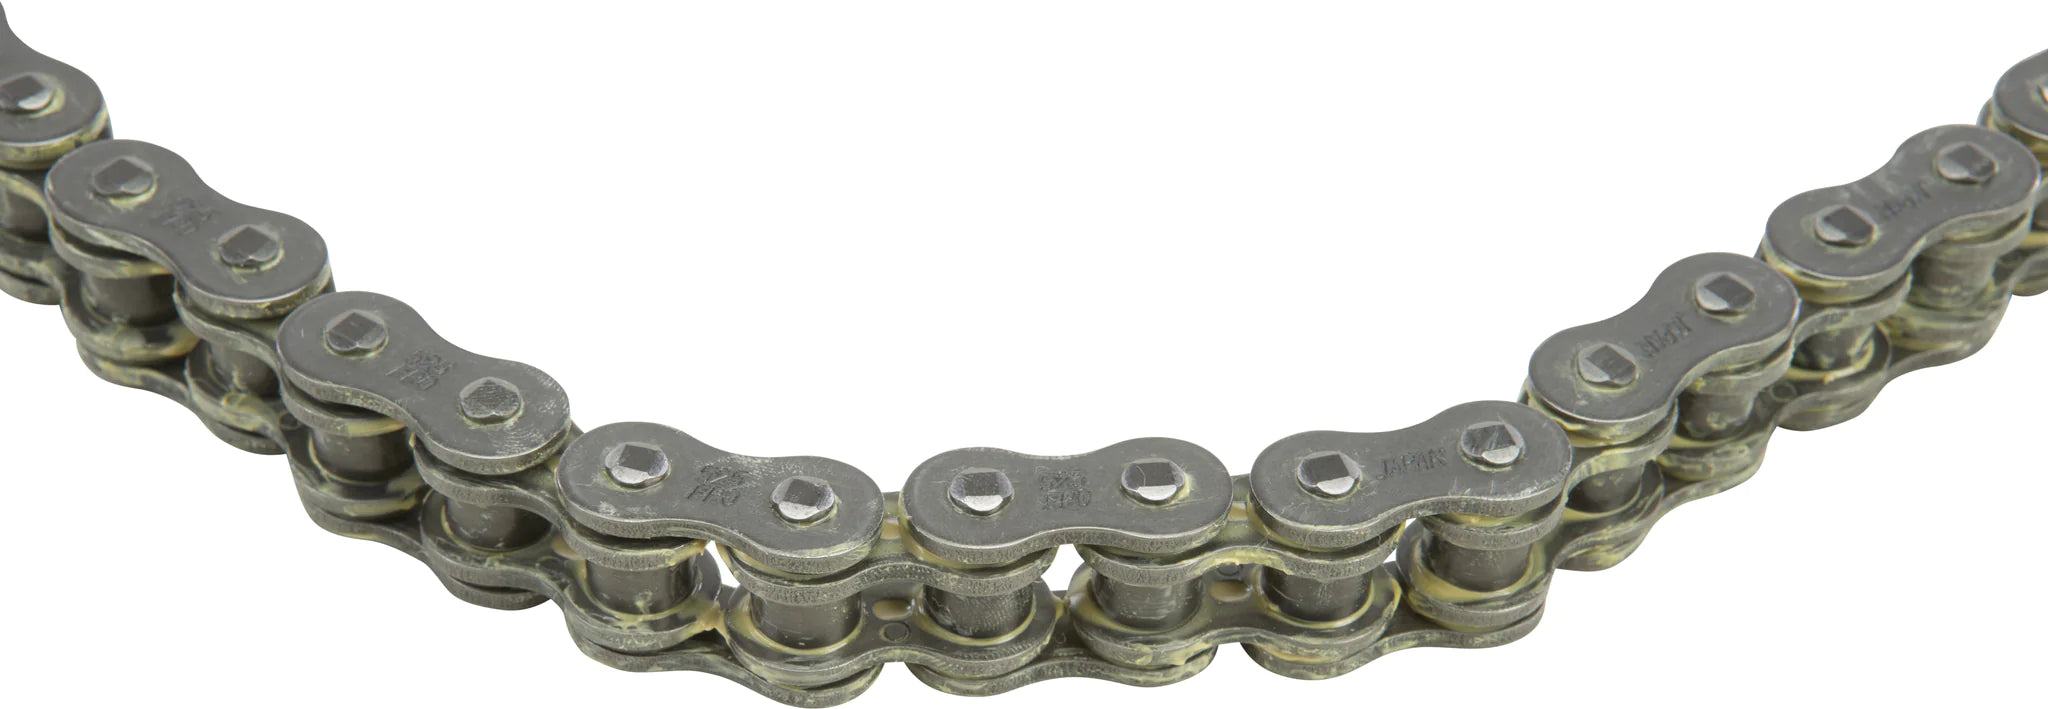 FPO CHAIN 525X120 O-RING